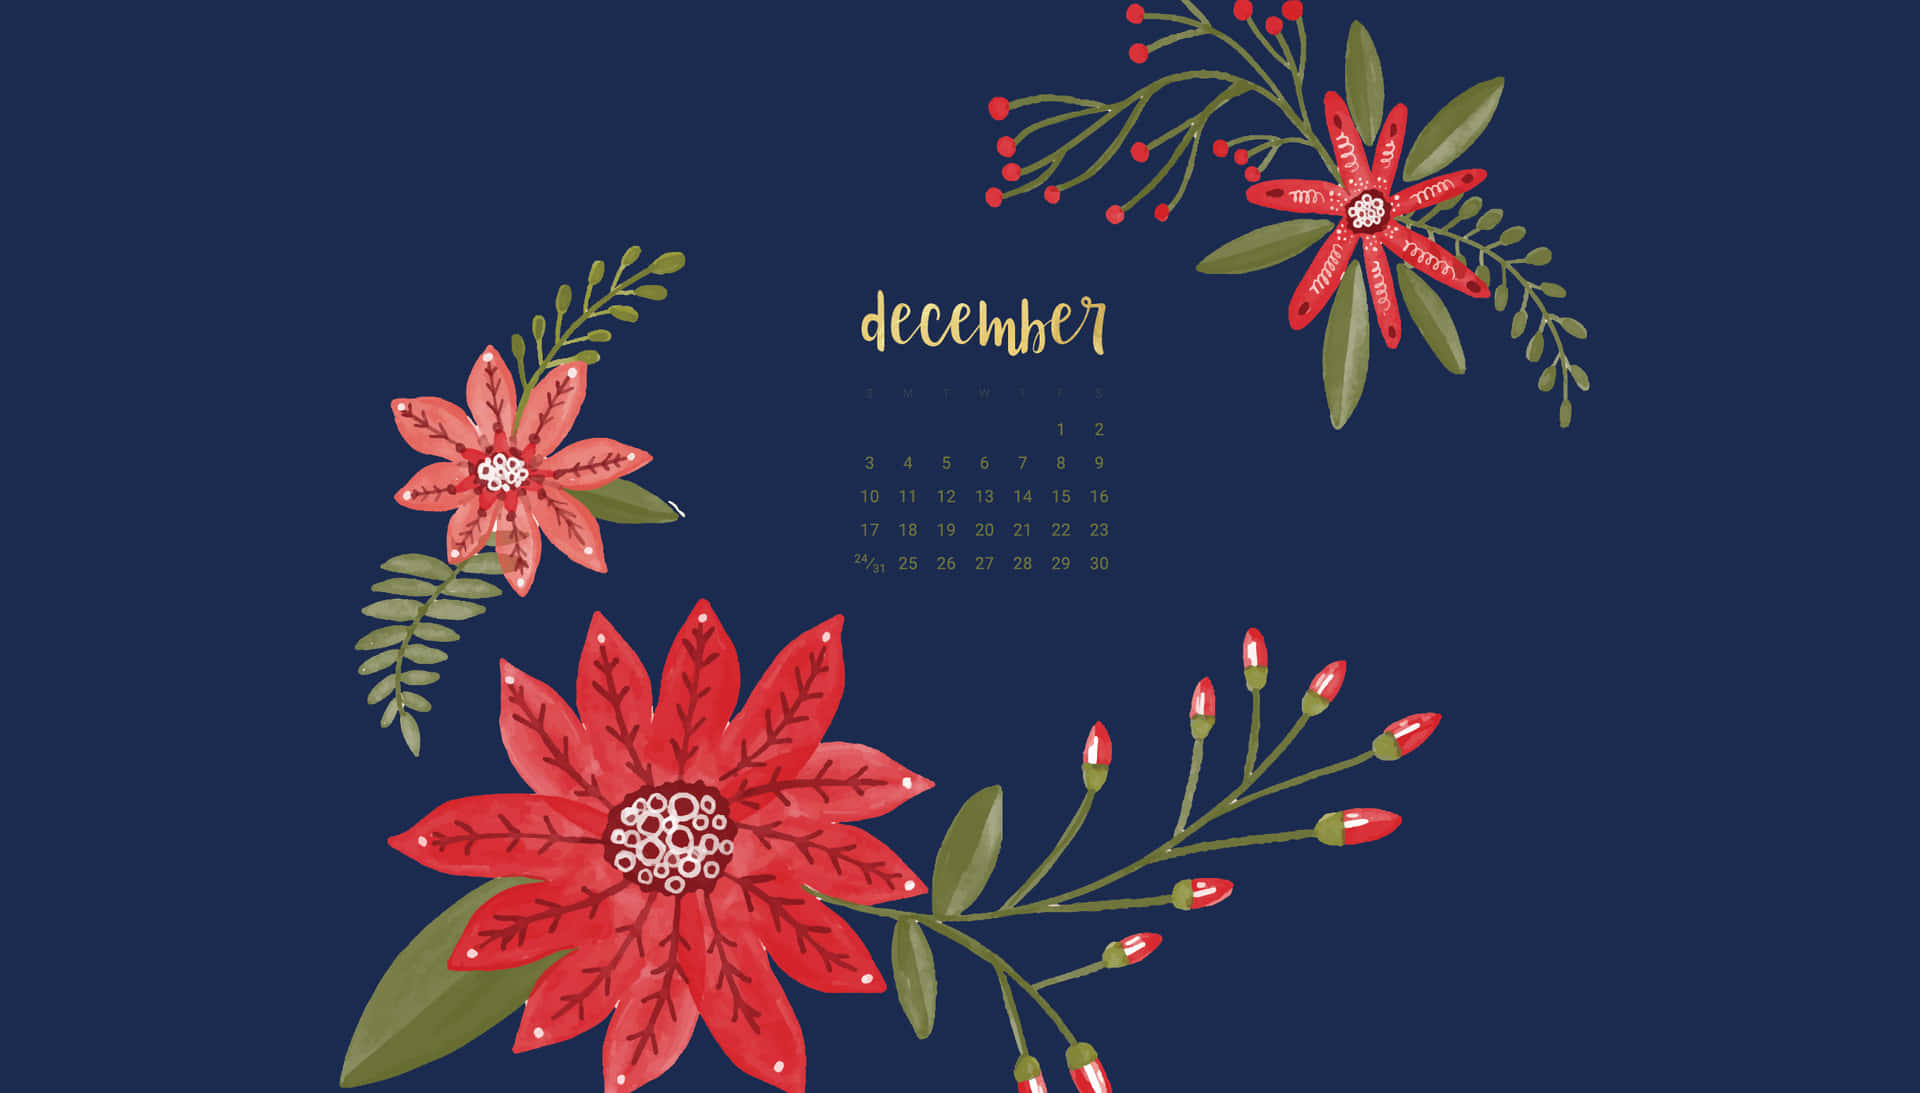 A Calendar With Red Flowers And Leaves On A Blue Background Wallpaper